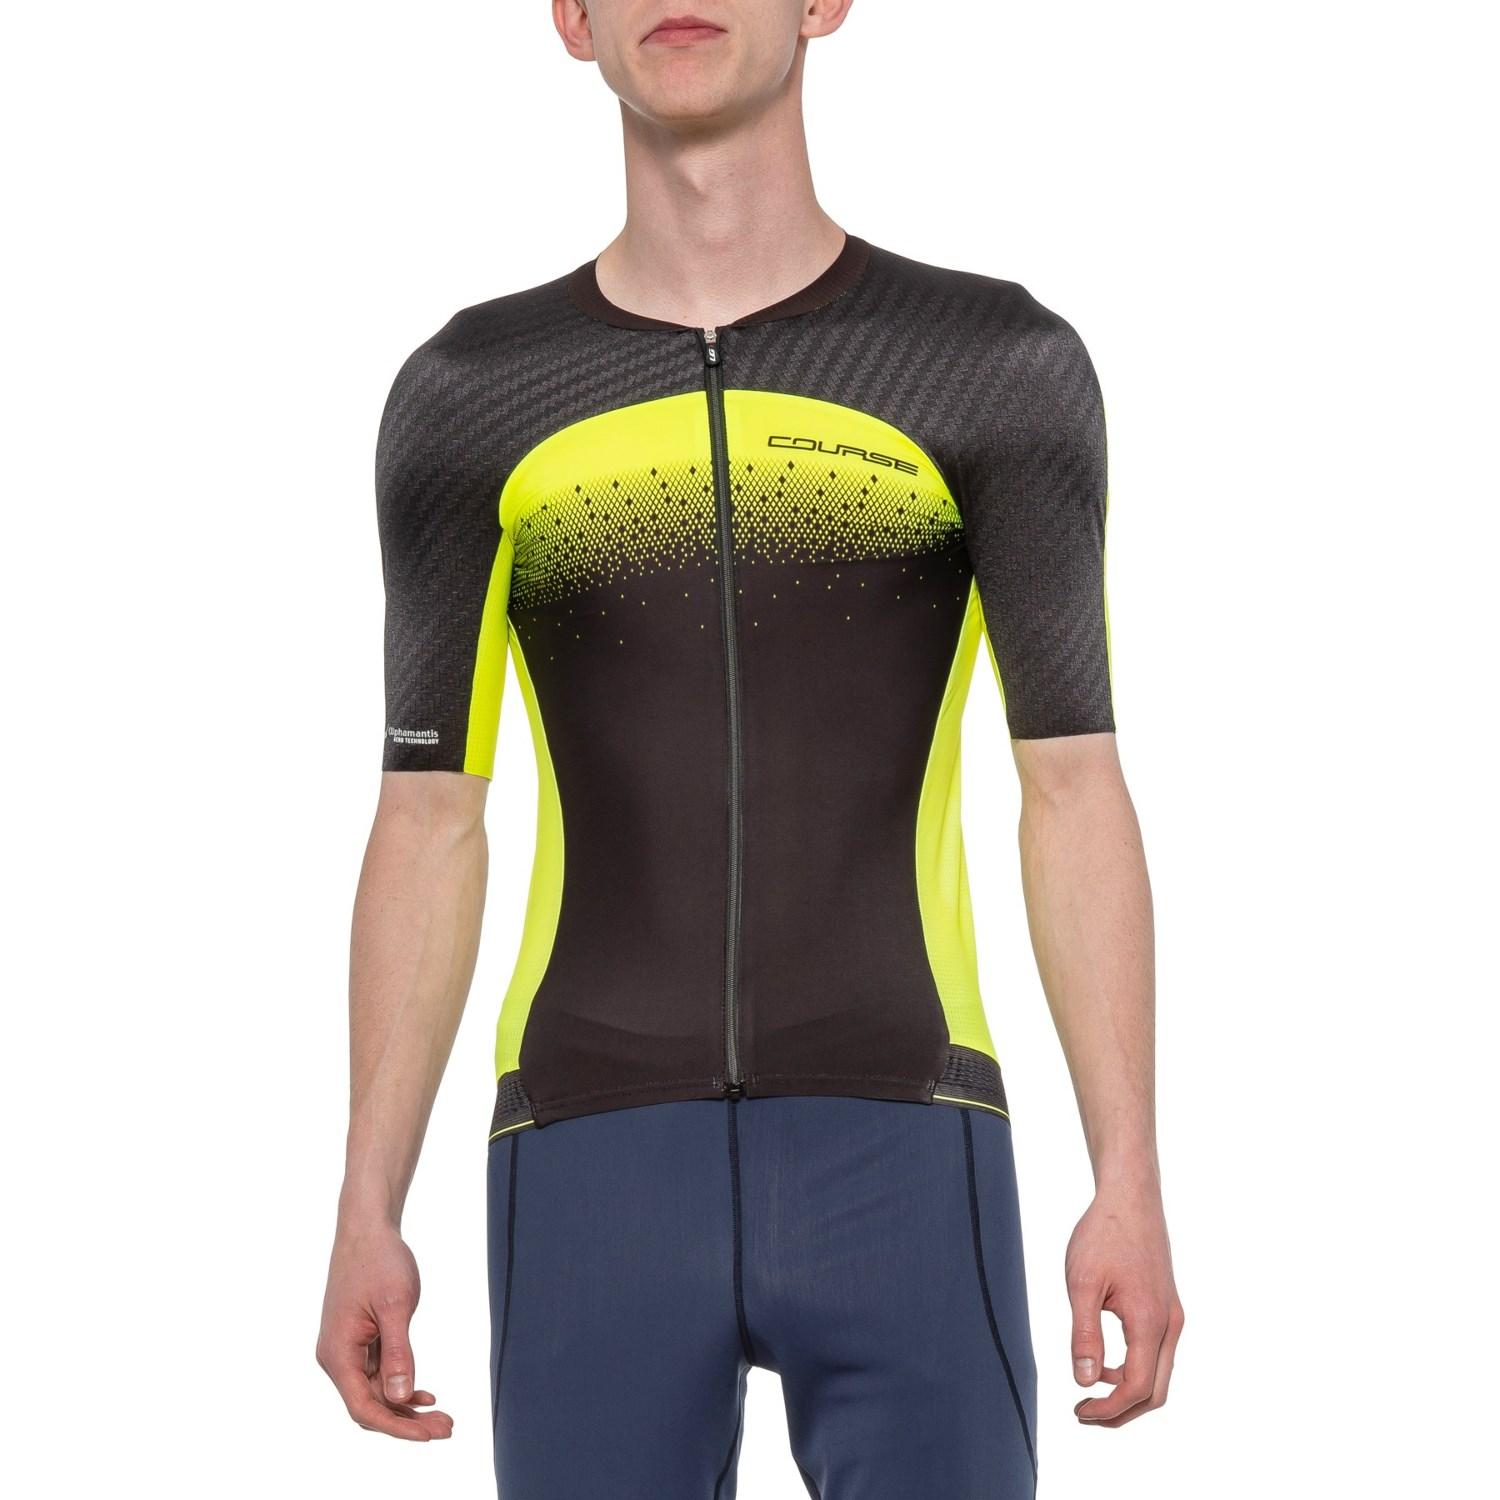 Louis Garneau Synthetic Course M-2 Cycling Jersey in Black/Bright Yellow (Black) for Men - Save ...